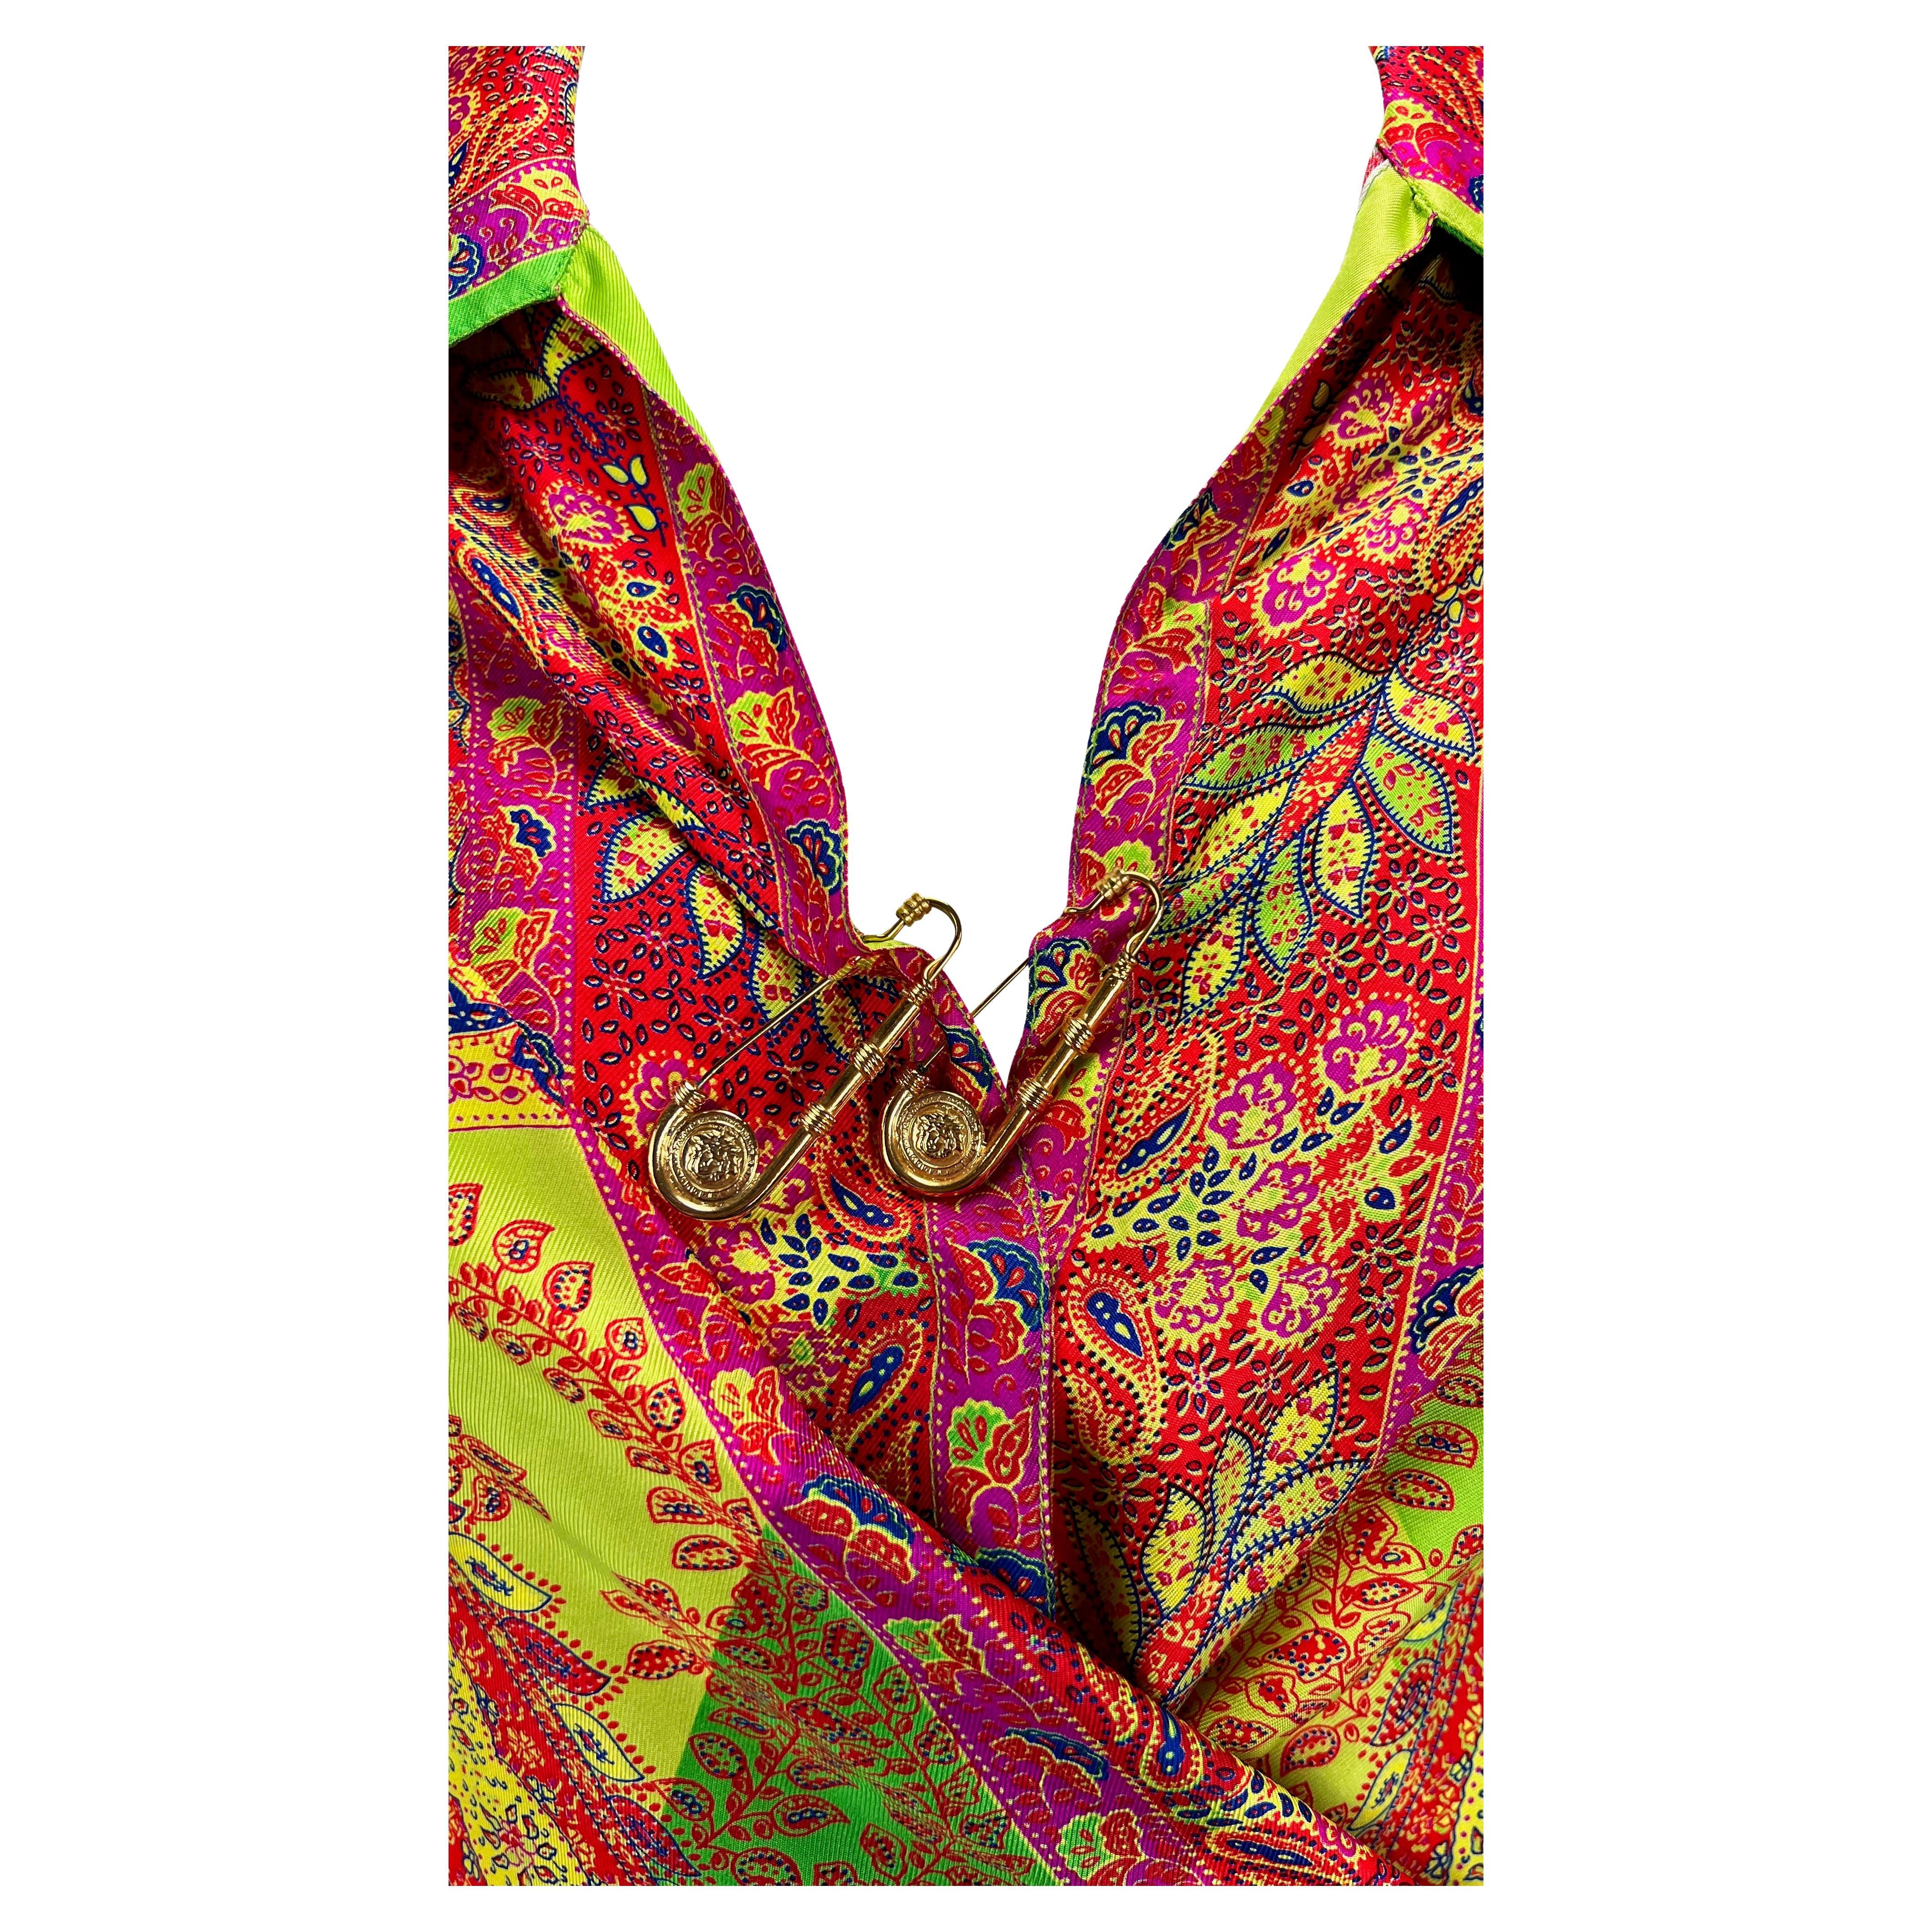 Presenting a gorgeous Bohemian-inspired safety pin Gianni Versace collared shirt, designed by Gianni Versace. From the Spring/Summer 1994 collection, this incredibly vibrant shirt features a floral paisley design, exaggerated collar, and v-neckline.